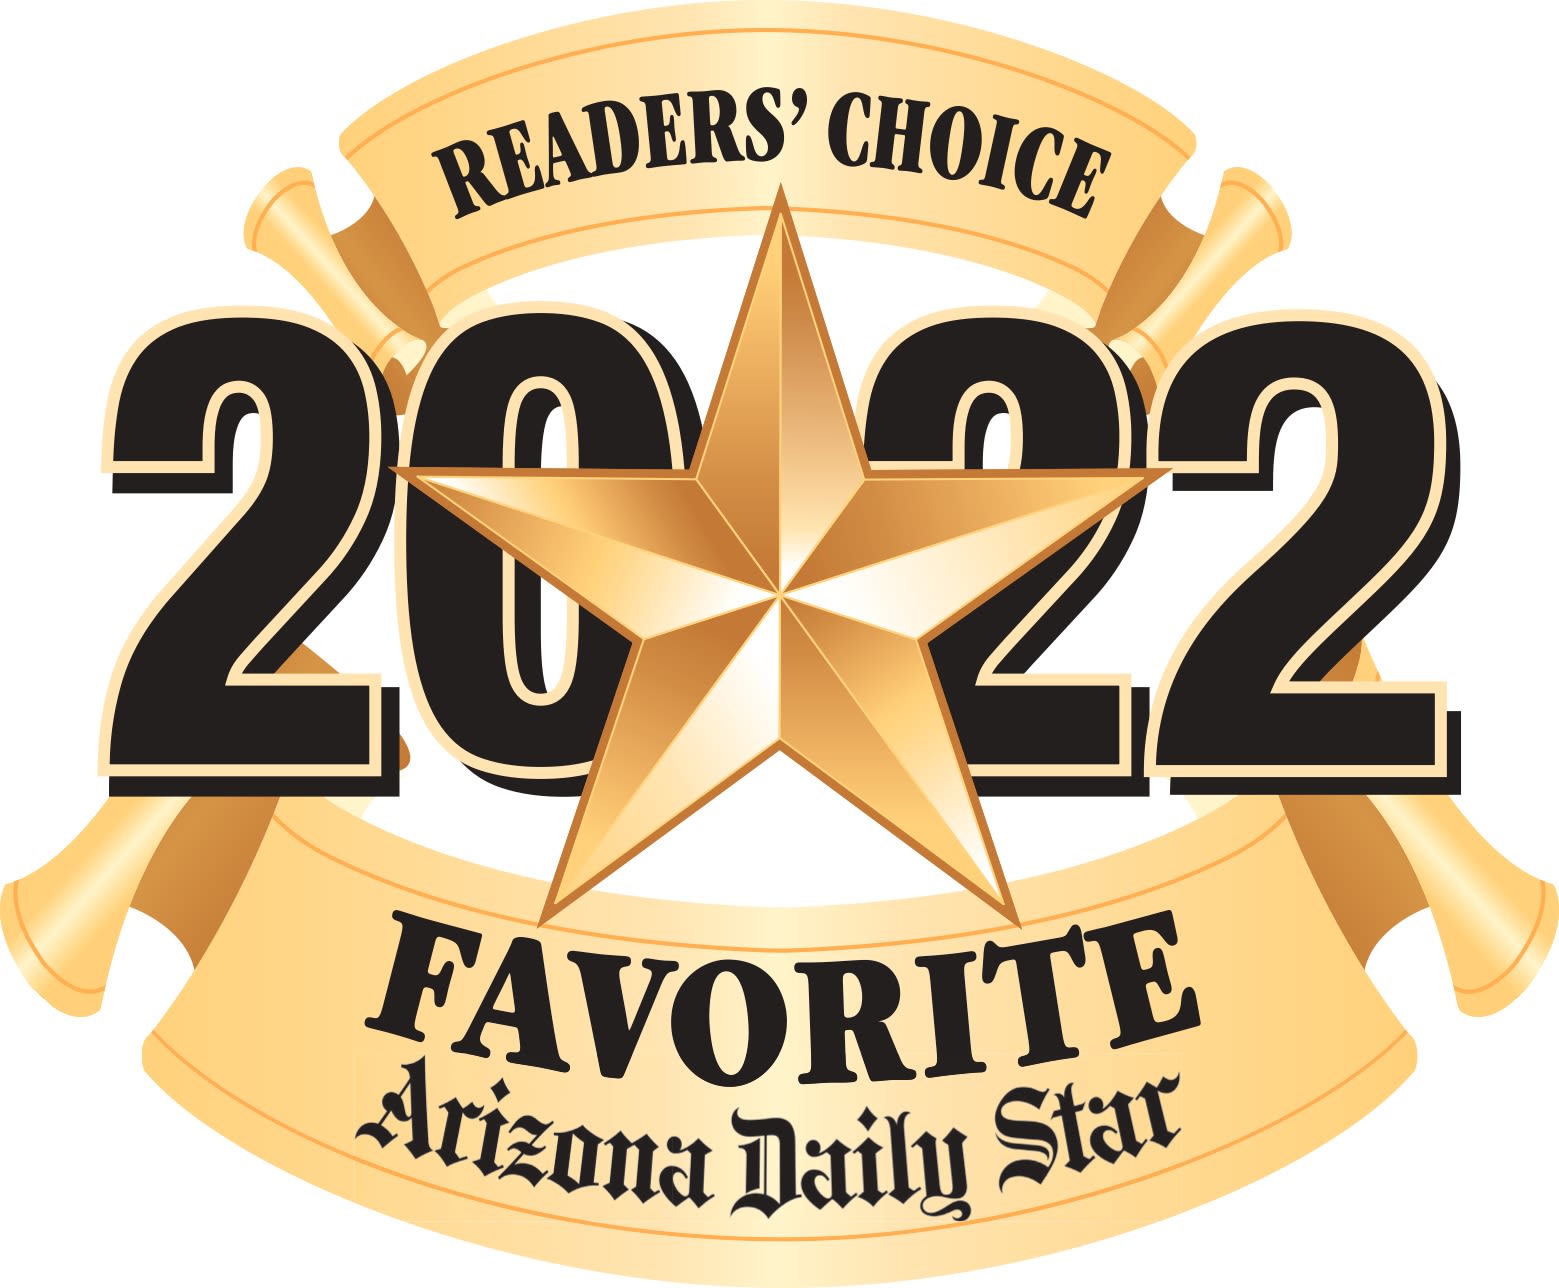 Readers Choice 2022 Favorite Award for Woodland Palms Memory Care